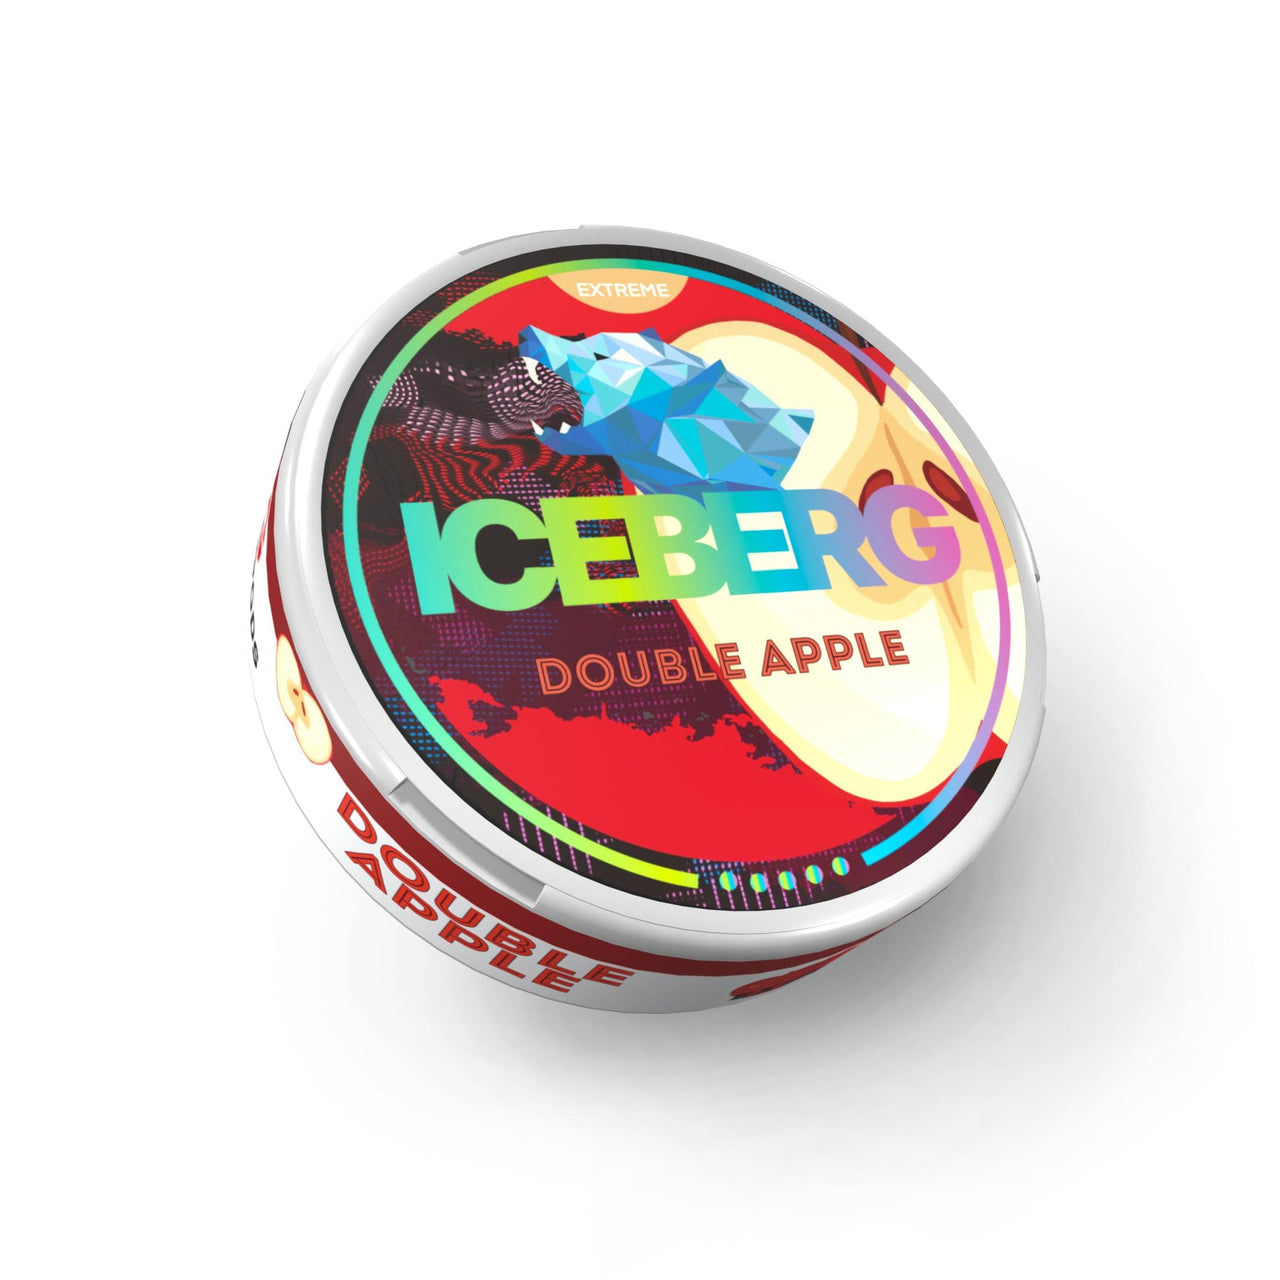 Buy Iceberg Double Apple | Low Prices And Fast Delivery